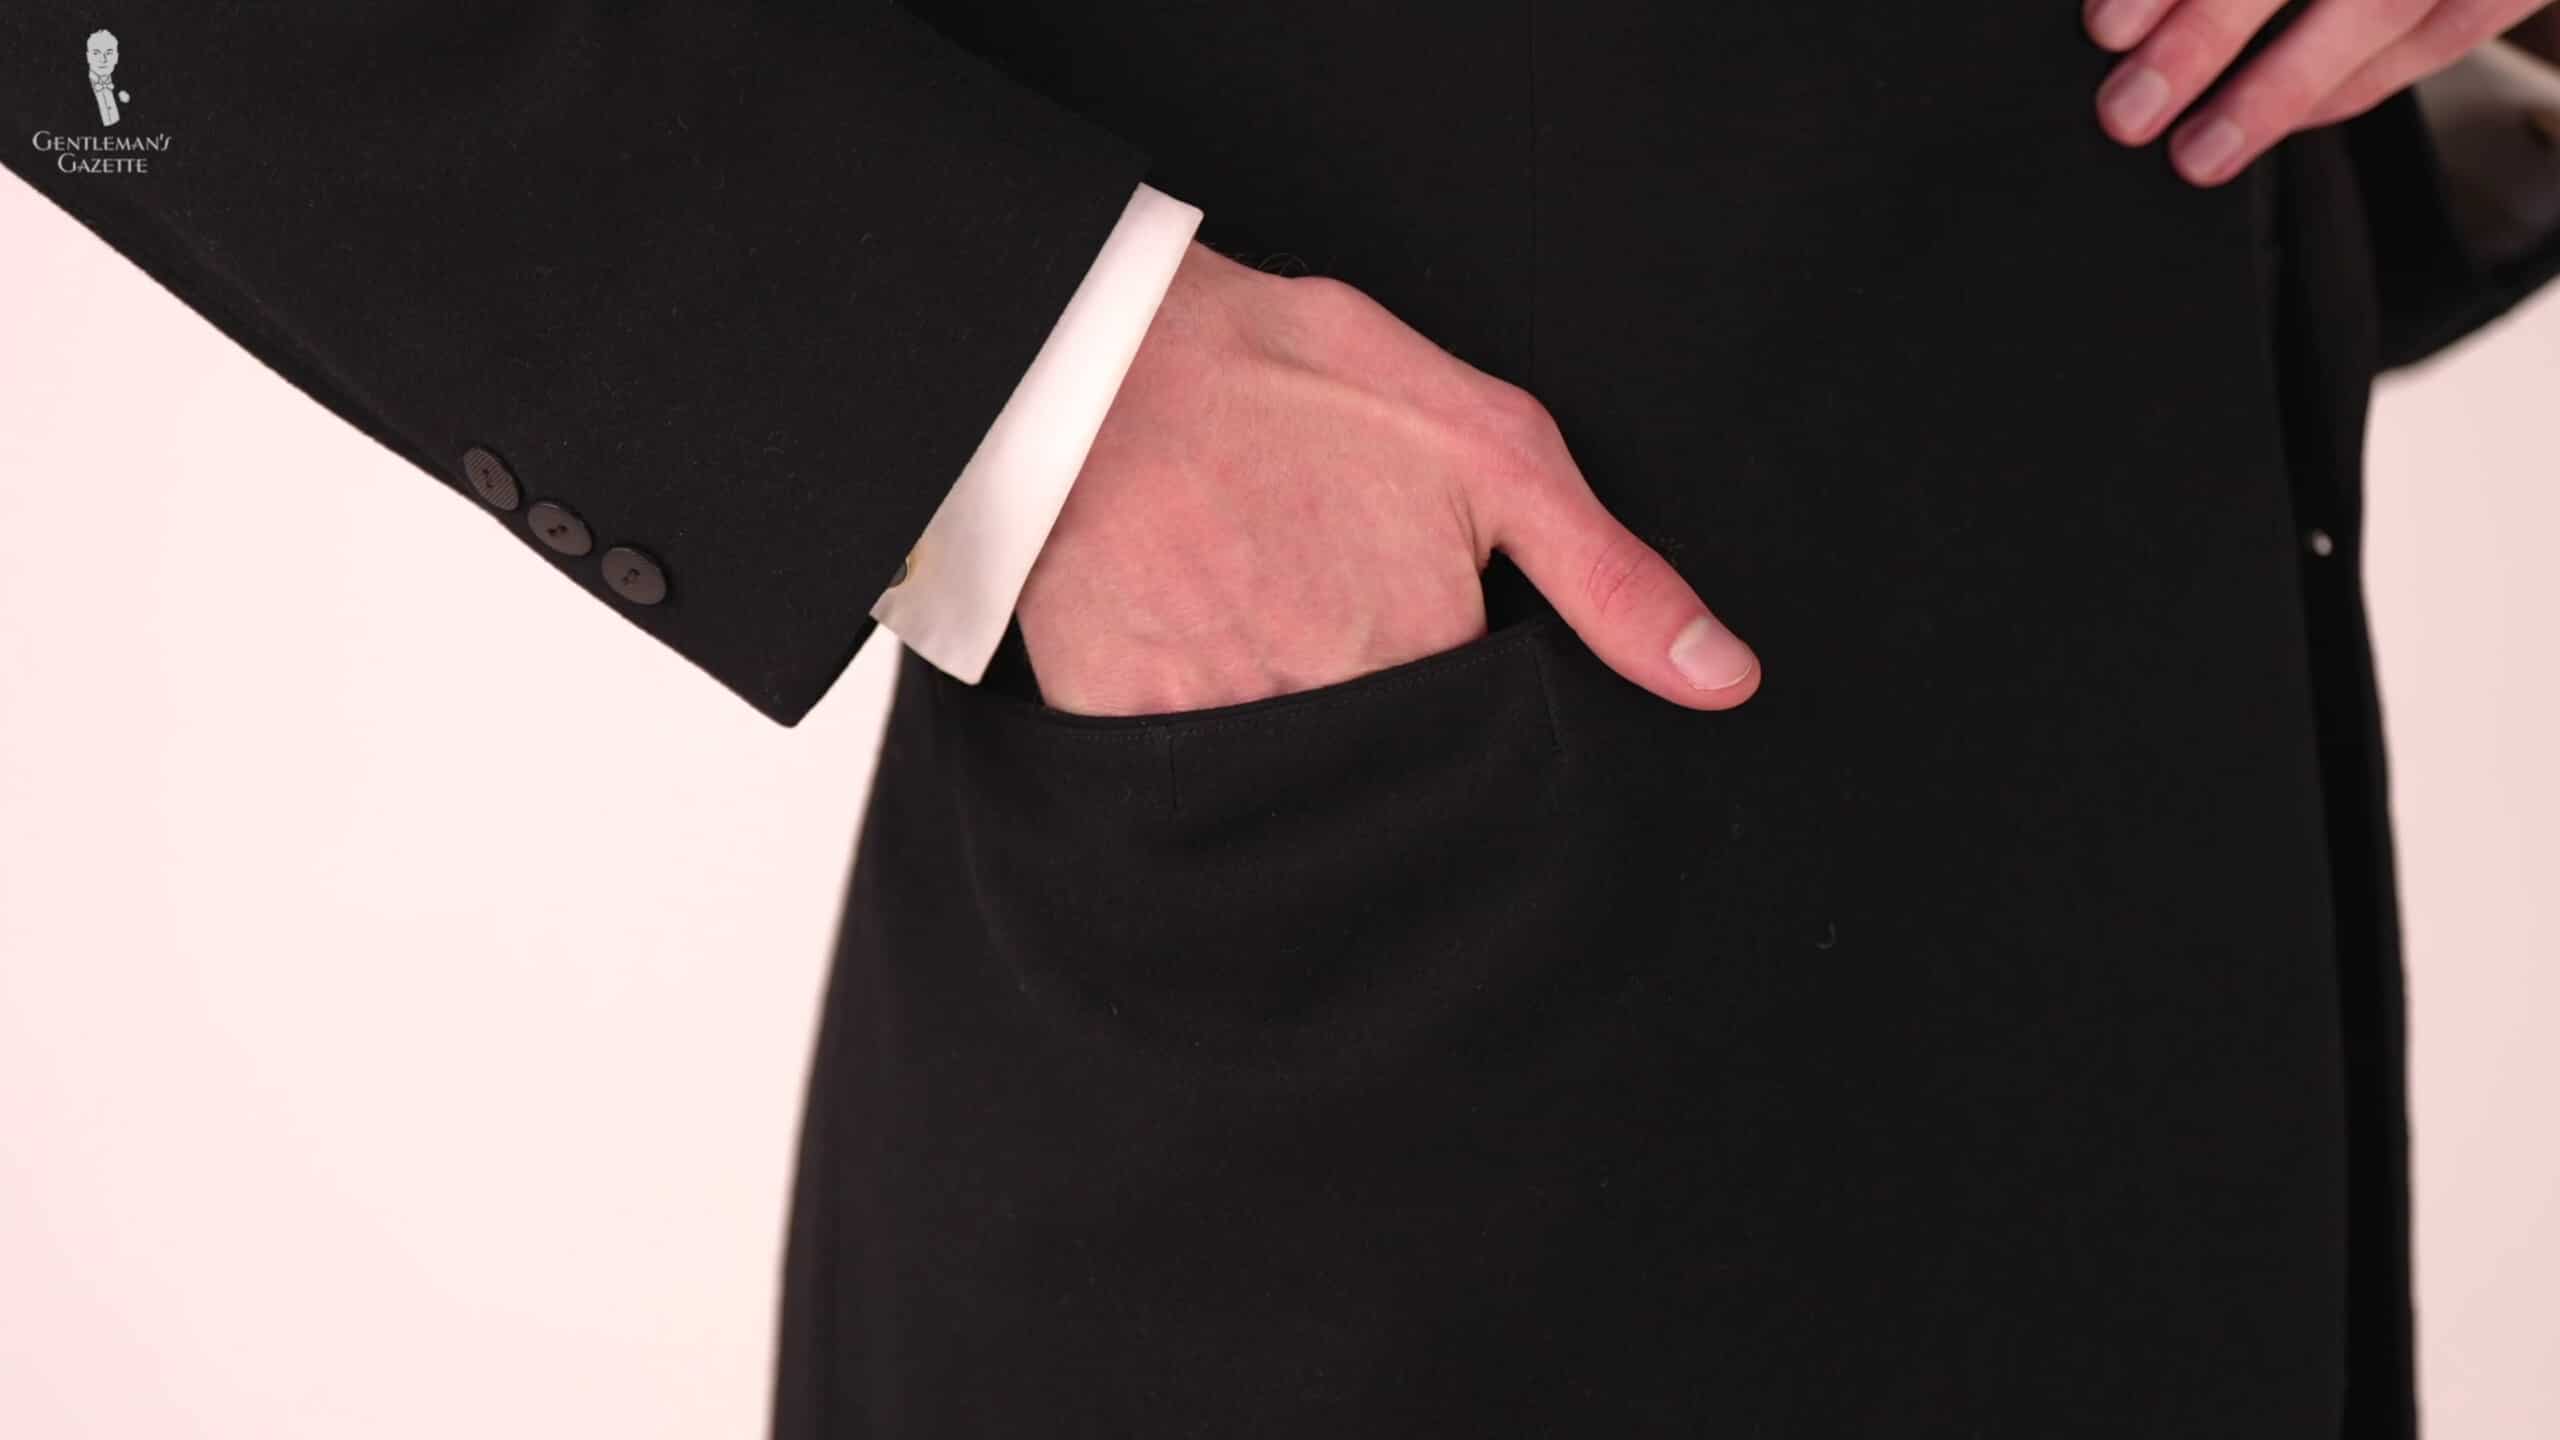 Tuxedos have jetted hip pockets.